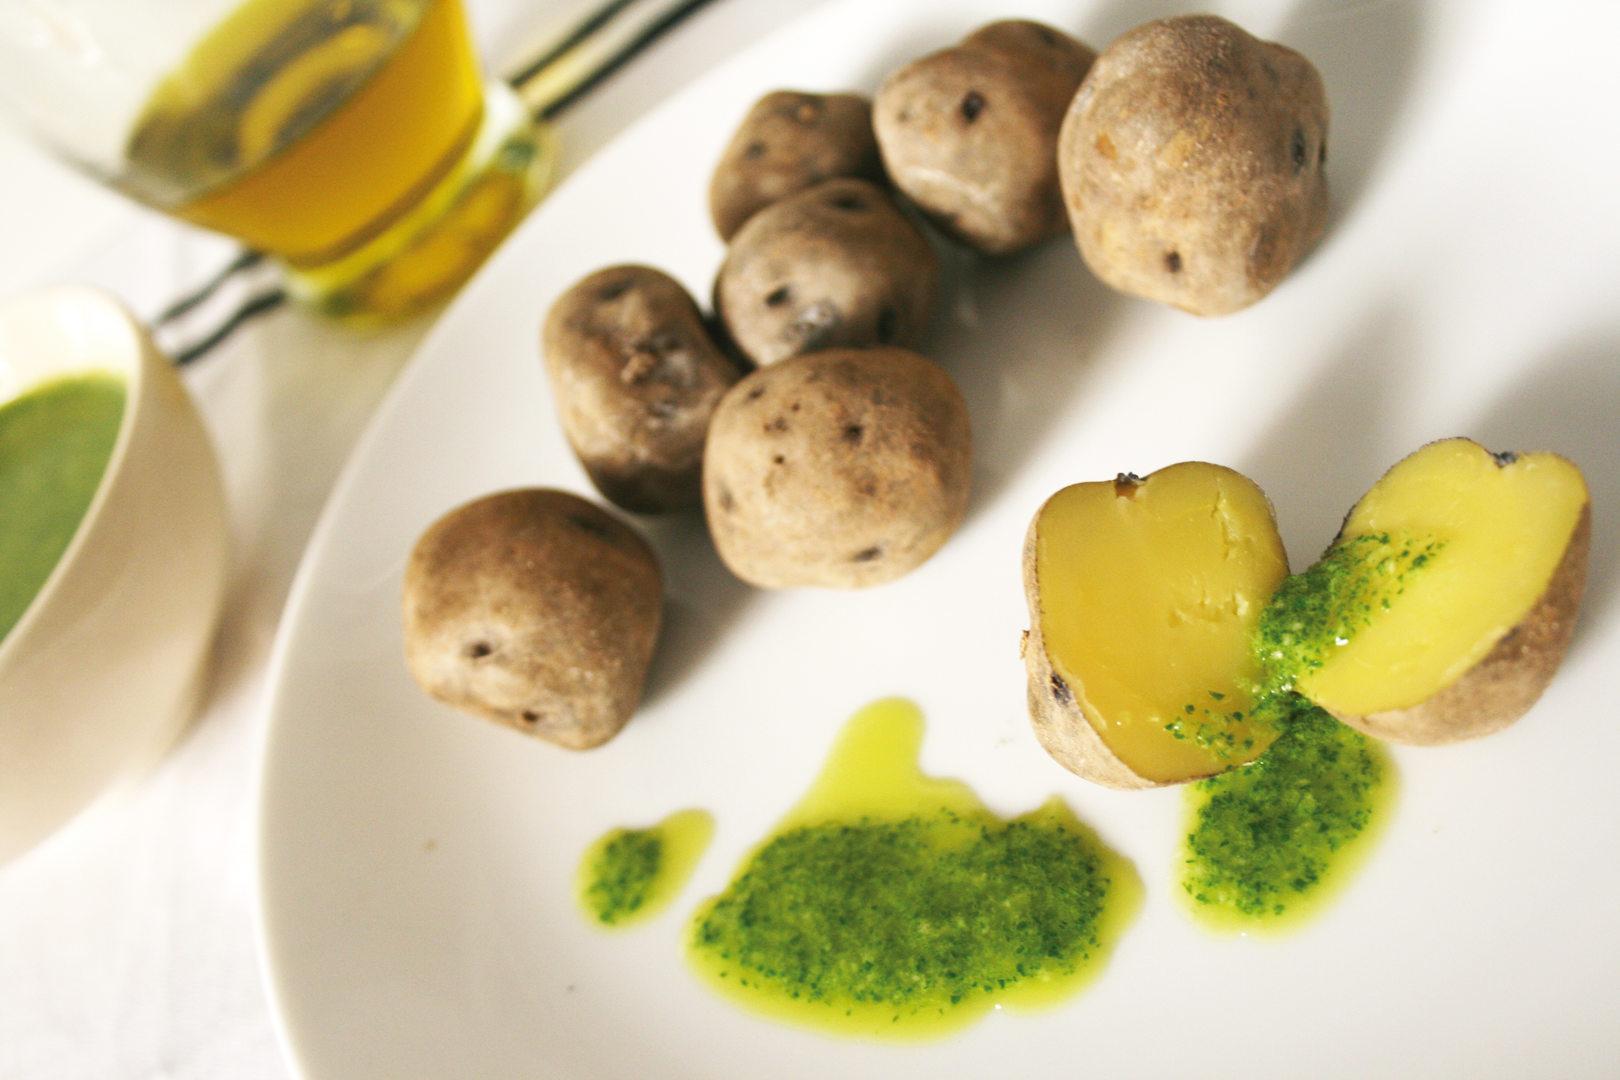 Recipe of Canarian potatoes or wrinkled potatoes from Tenerife